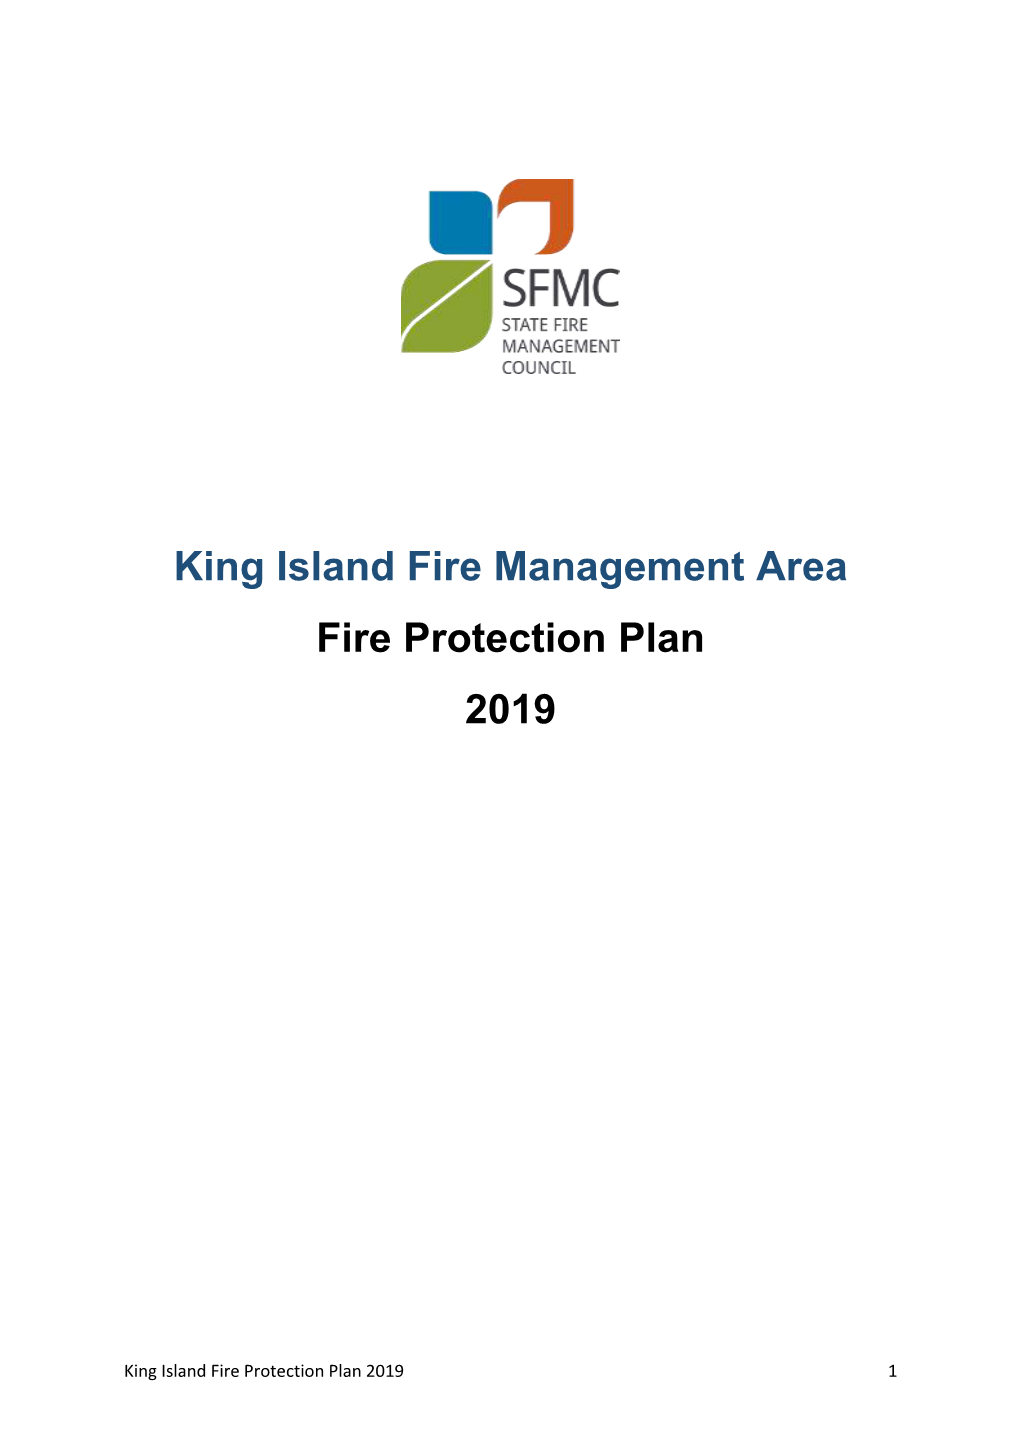 King Island Fire Management Area Fire Protection Plan 2019